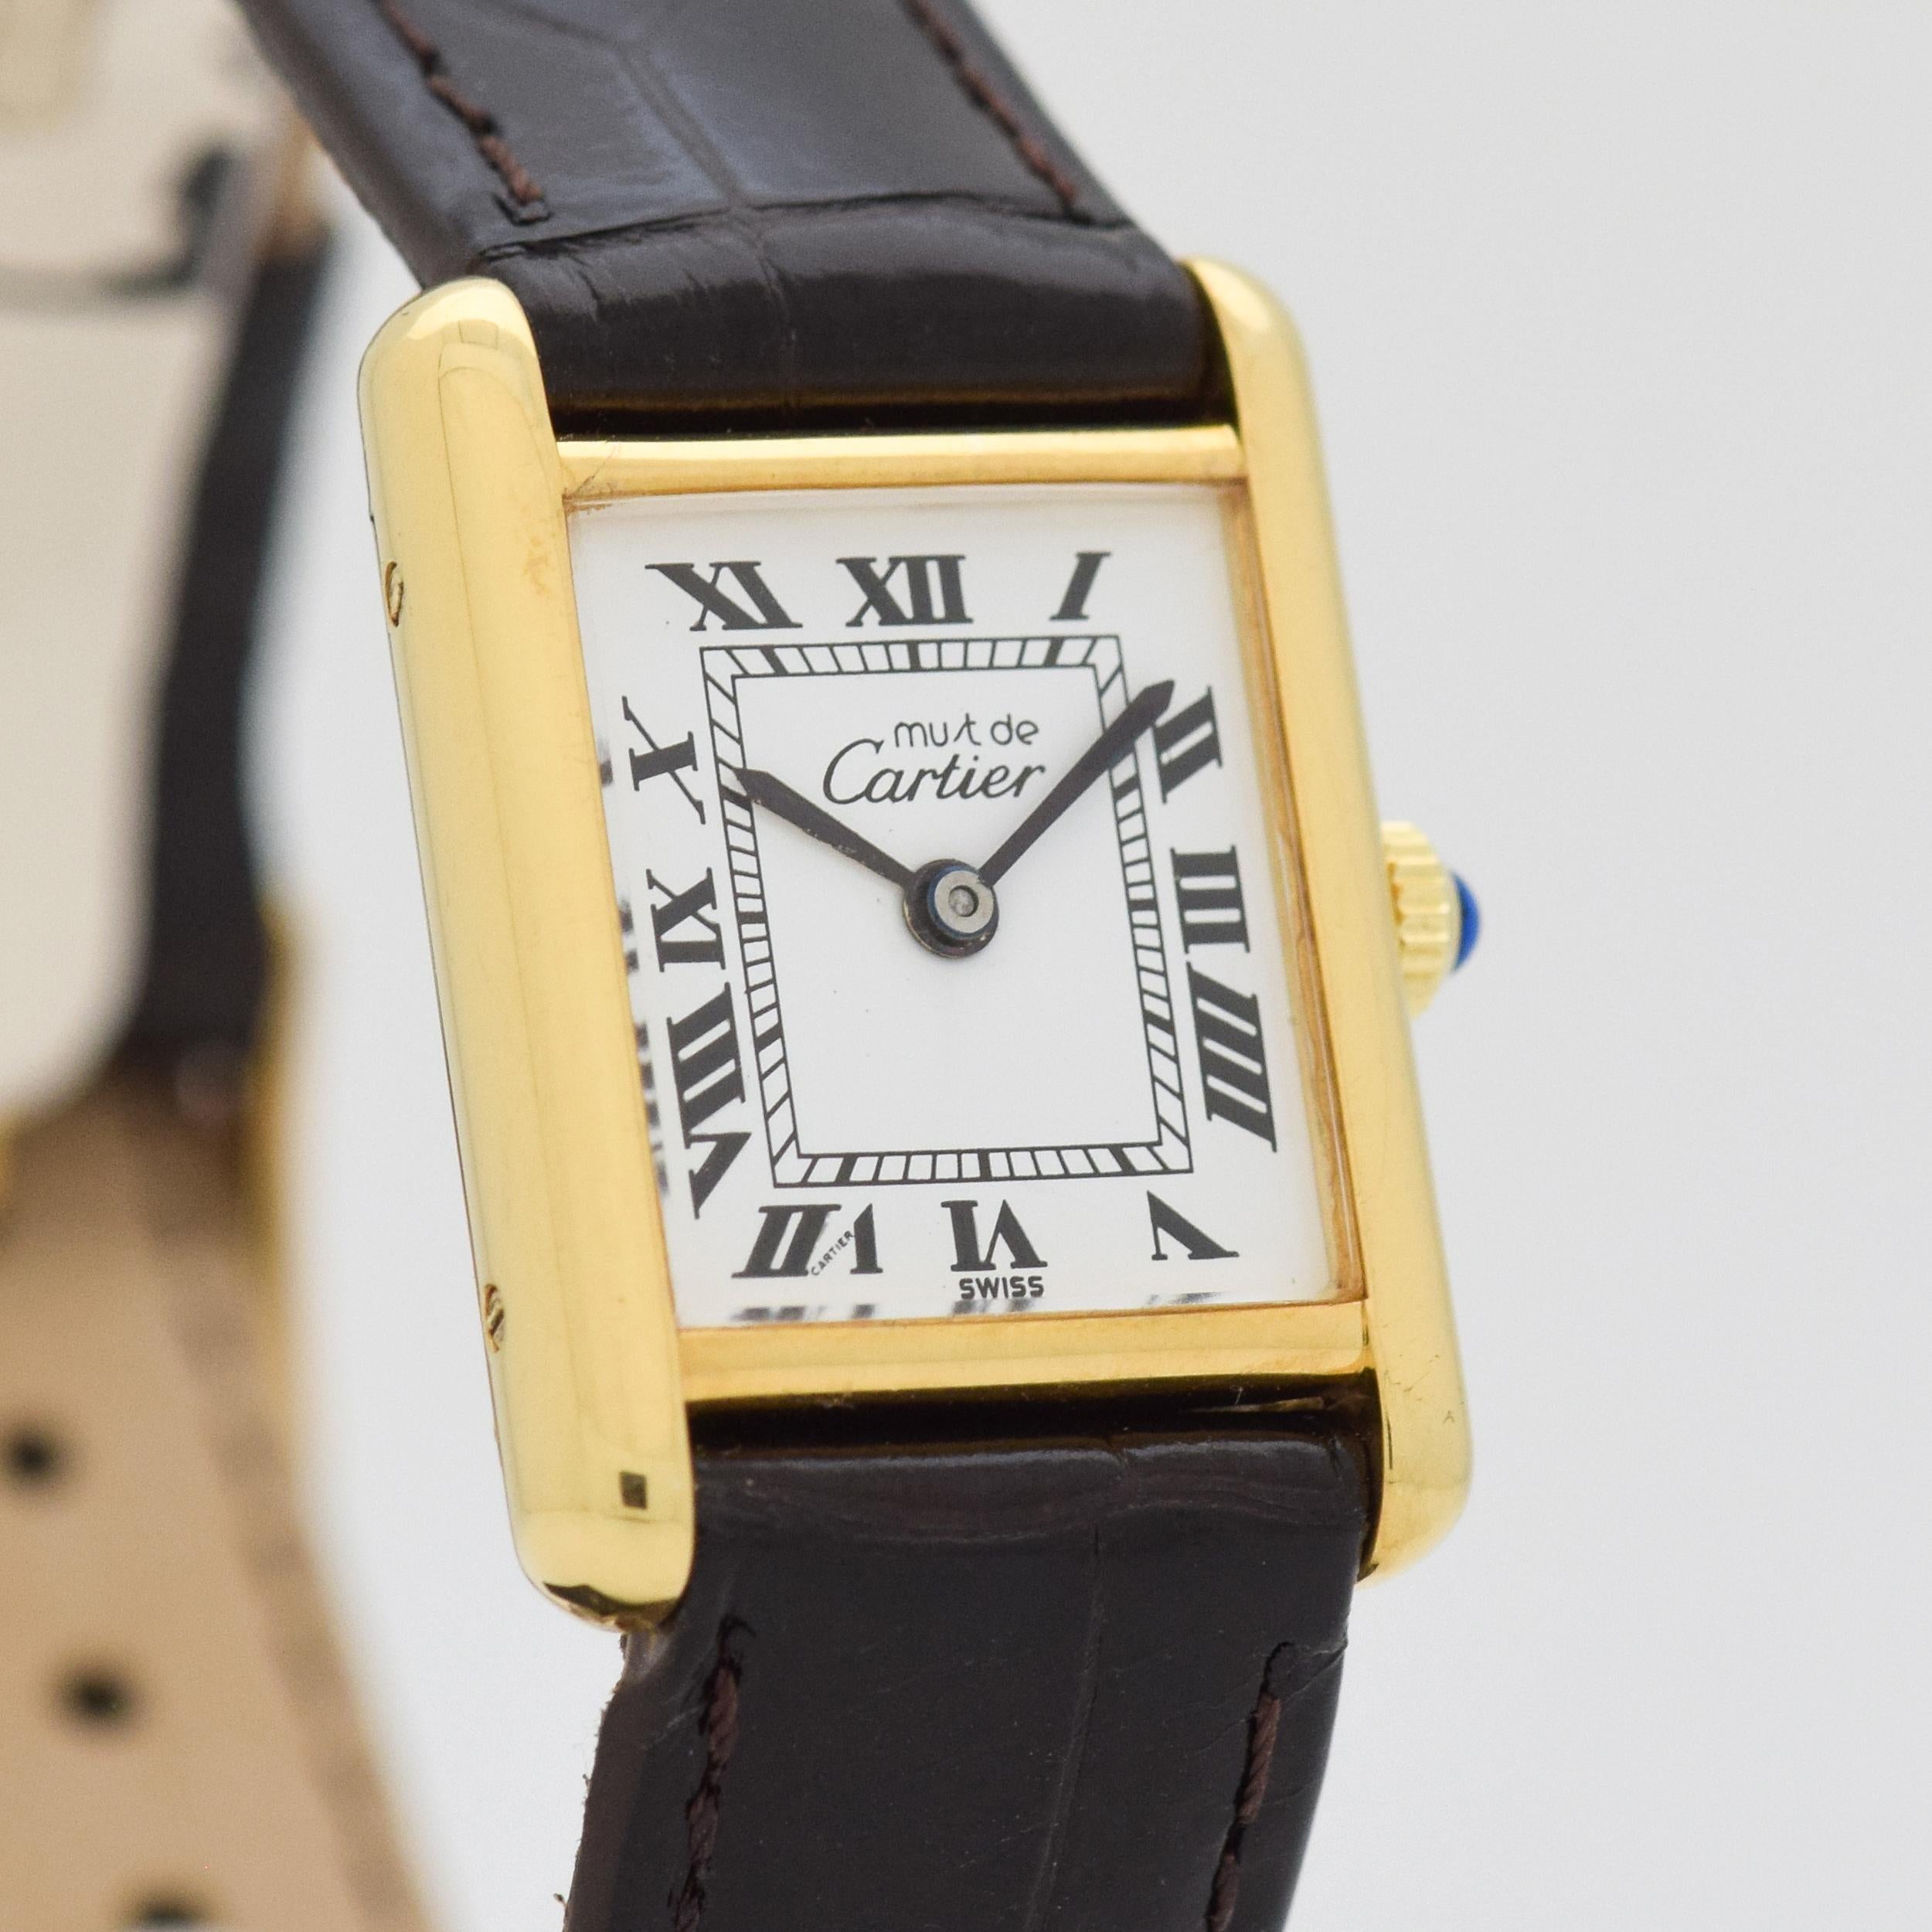 1990's era Cartier Tank Must de Ladies Sized Watch. 18K Yellow Gold Plated over Sterling Silver case. Original, white dial with black-colored, Roman numerals. Case size, 20mm wide. Powered by a 17-jewel, manual caliber ETA movement. Swiss.